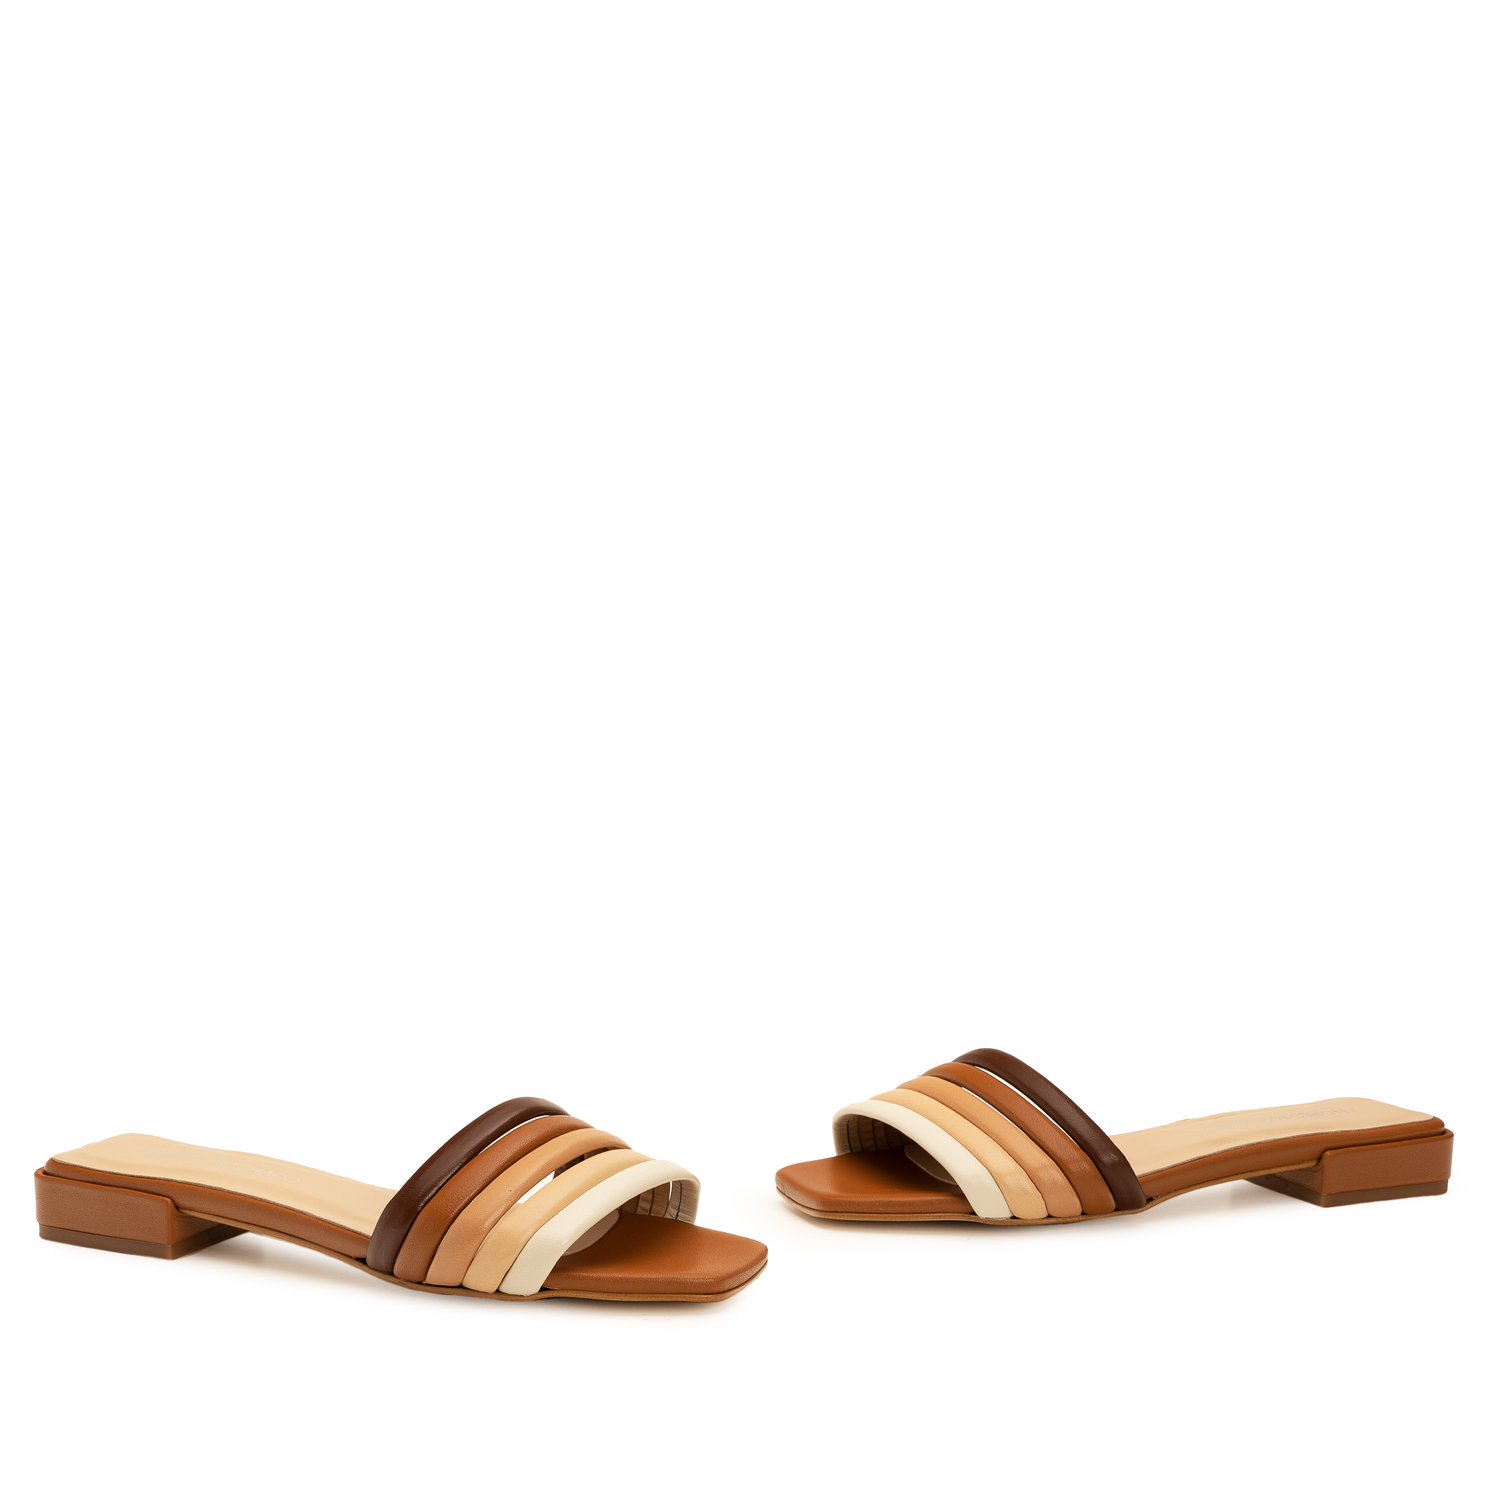 Flat Sandals in Multi-Colored Leather 